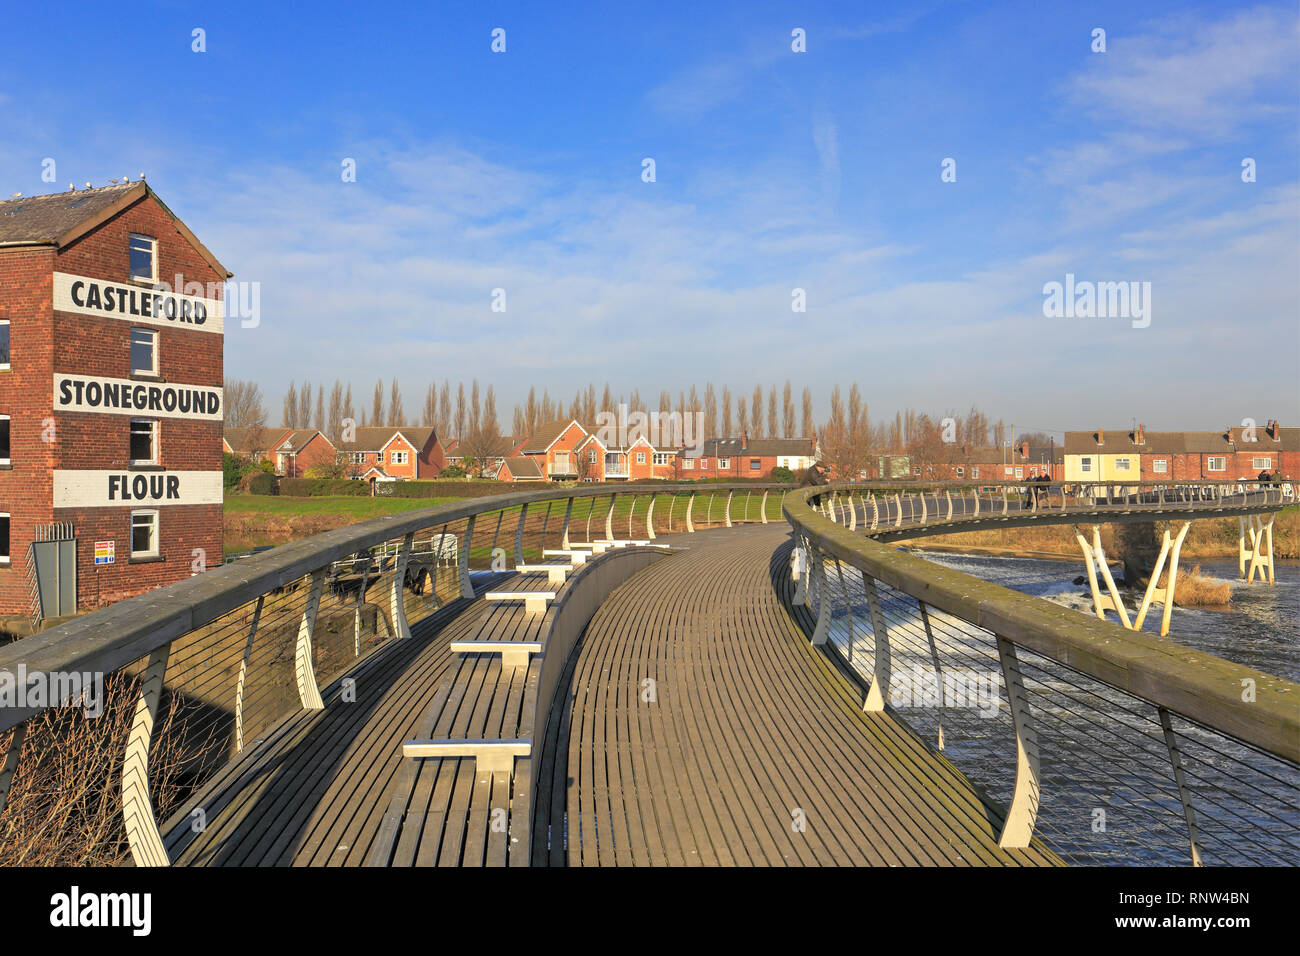 Millennium Bridge over the River Aire by Queen's Mill, Castleford, West Yorkshire, England, UK. Stock Photo